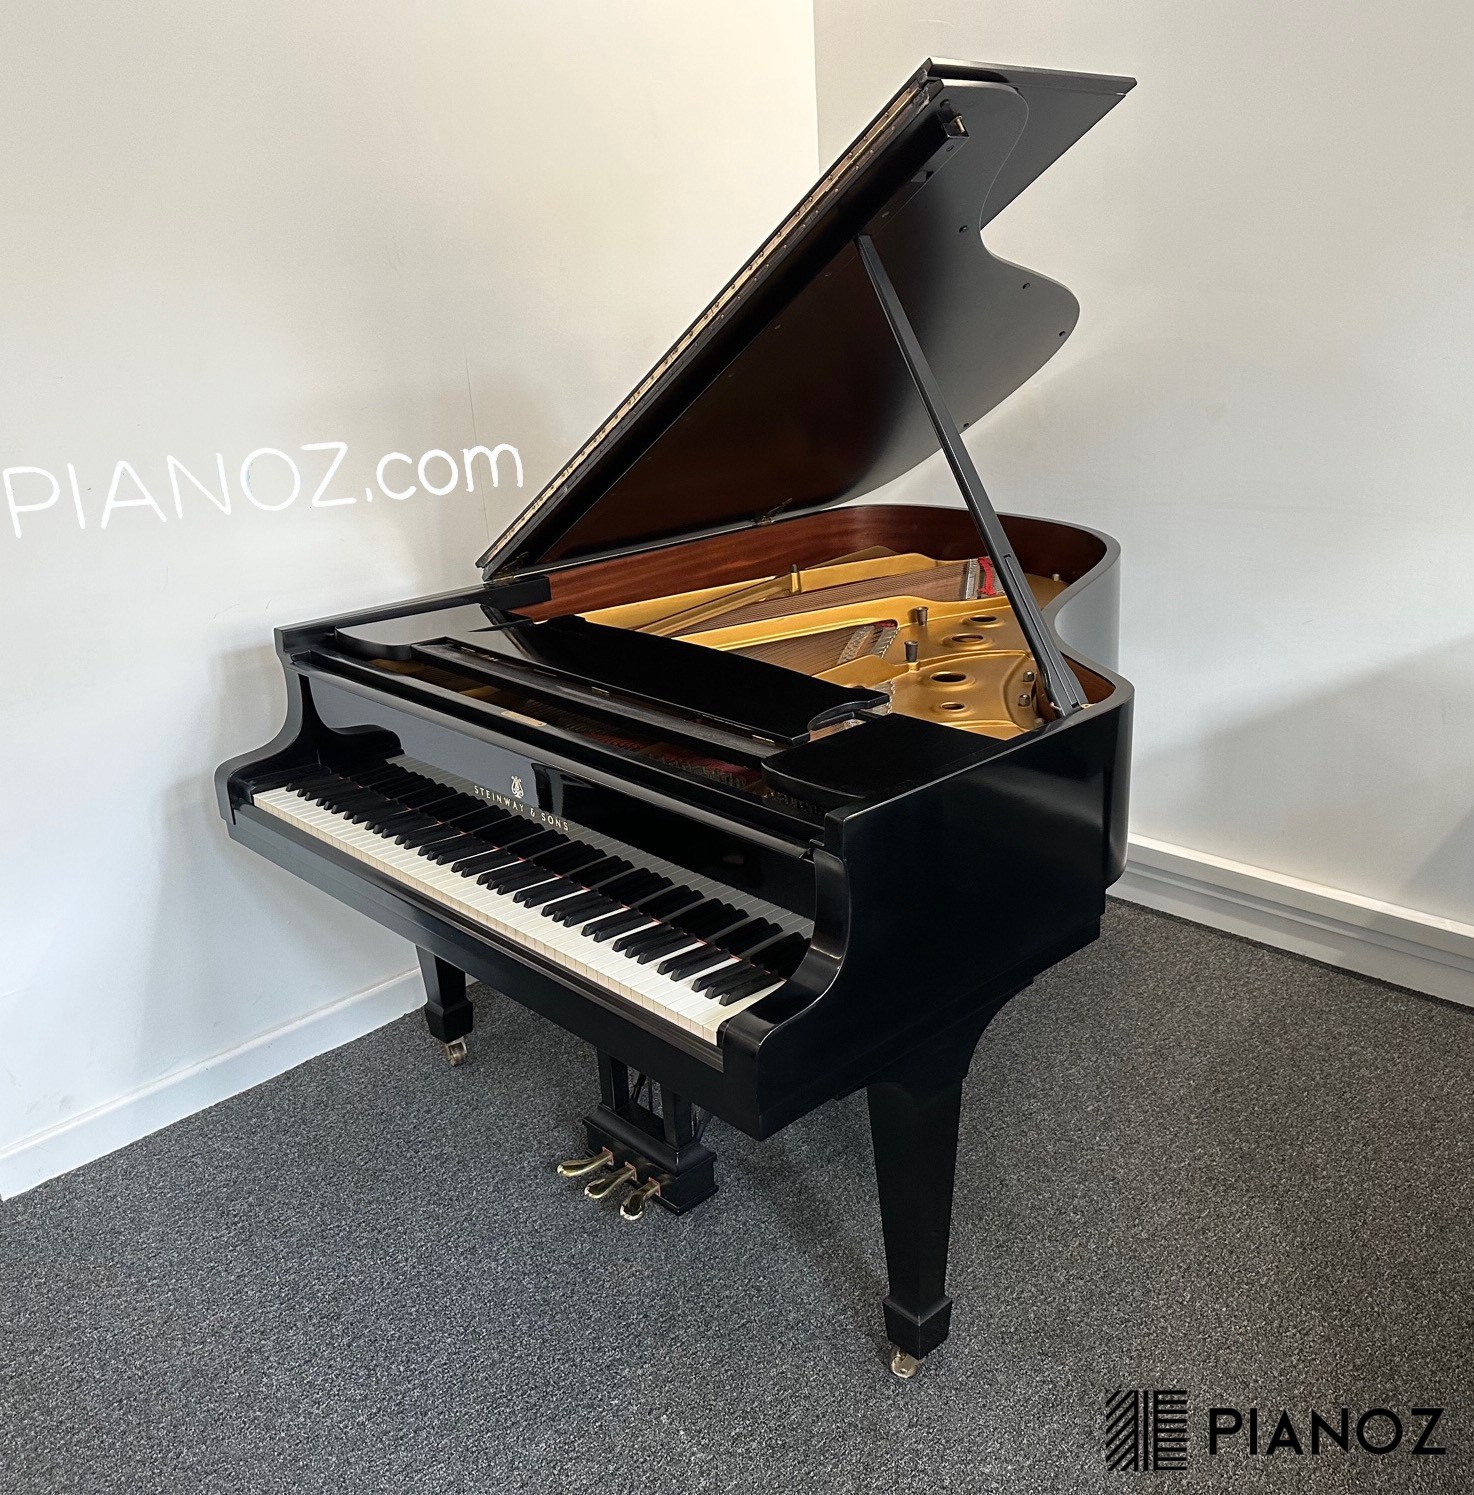 Steinway & Sons Model A 1972 Grand Piano piano for sale in UK